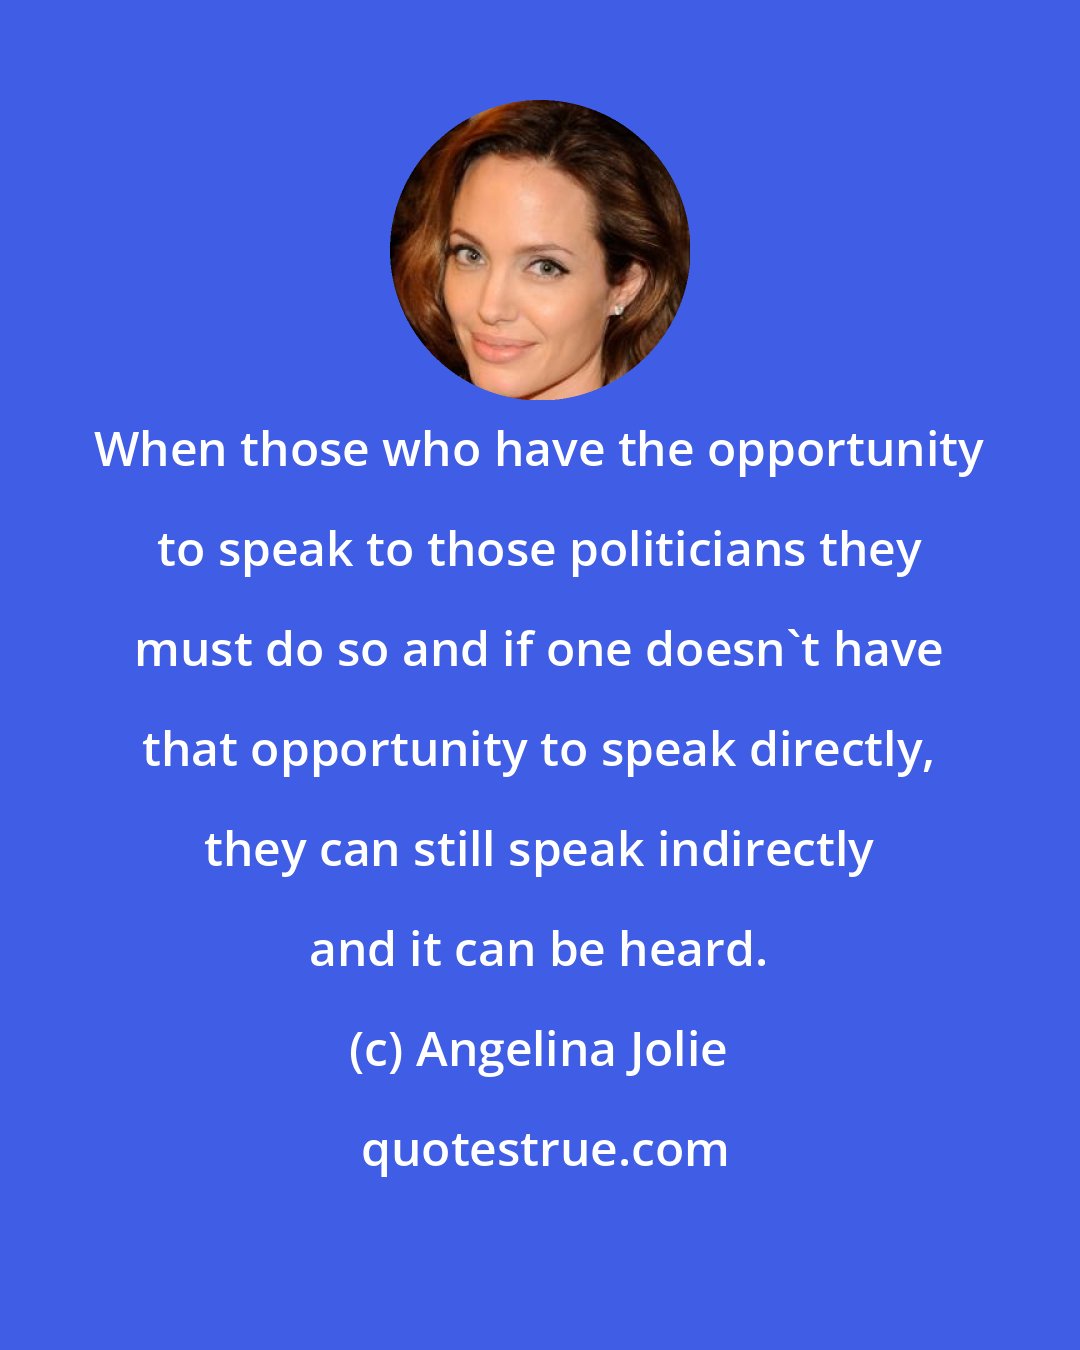 Angelina Jolie: When those who have the opportunity to speak to those politicians they must do so and if one doesn't have that opportunity to speak directly, they can still speak indirectly and it can be heard.